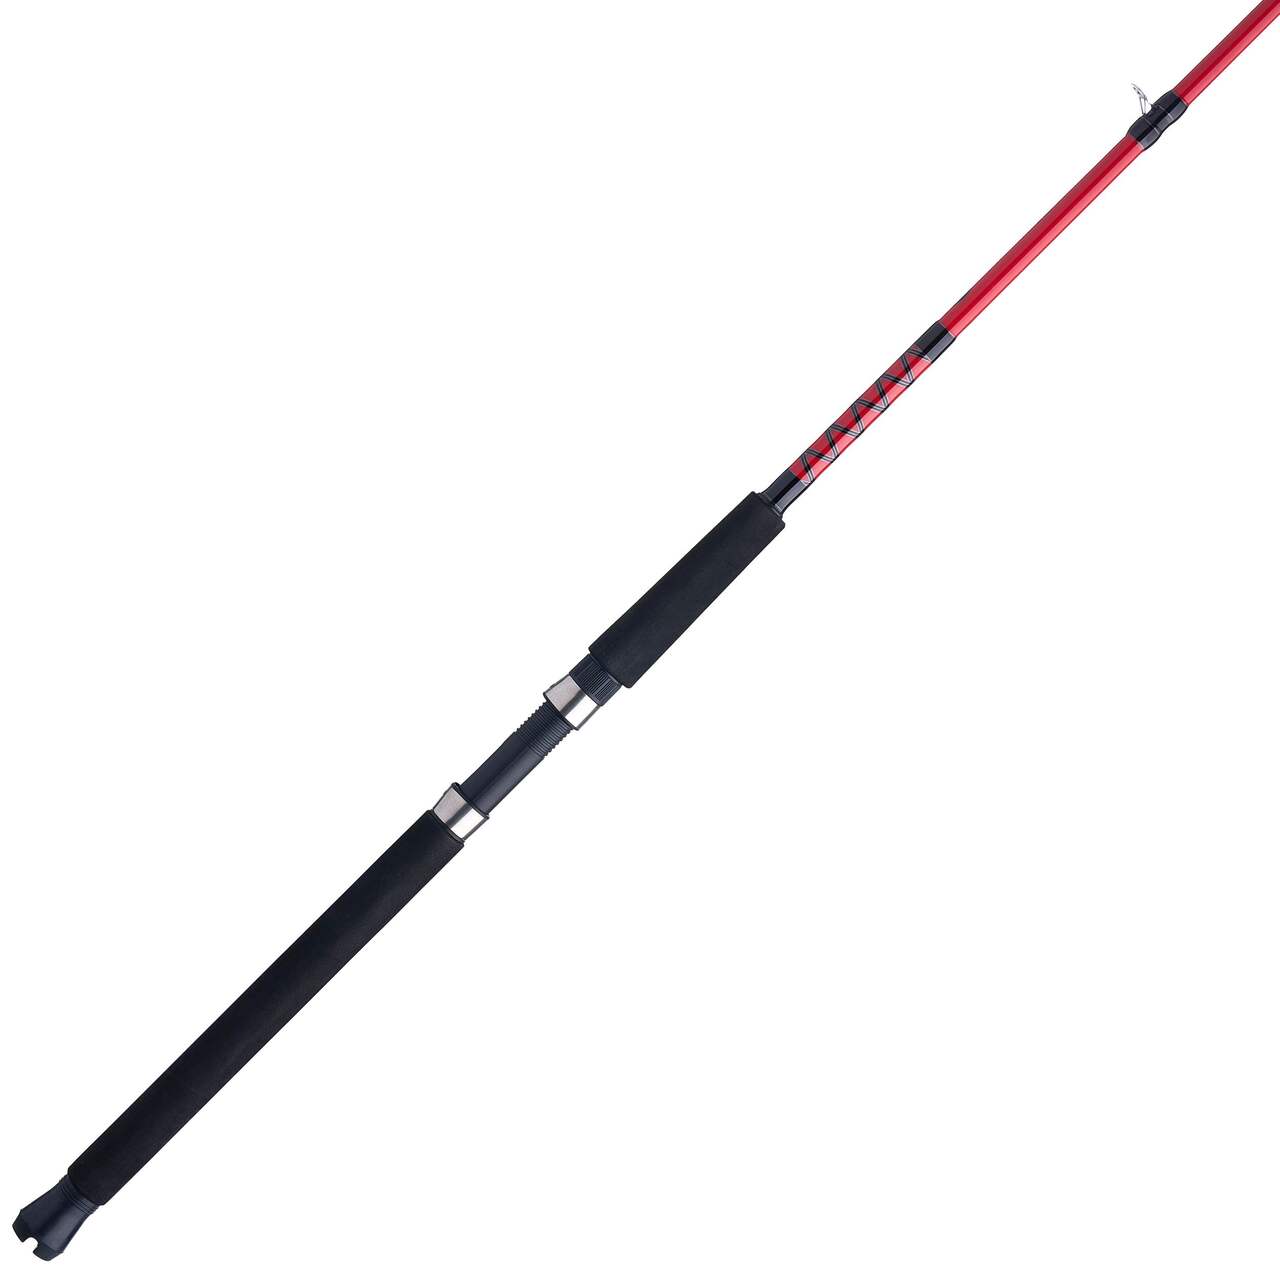 https://media-www.canadiantire.ca/product/playing/fishing/fishing-equipment/0775470/penn-mariner-3-trolling-rod-9-0--1c926657-2900-4ee6-8c92-ee9a569b0a28-jpgrendition.jpg?imdensity=1&imwidth=1244&impolicy=mZoom